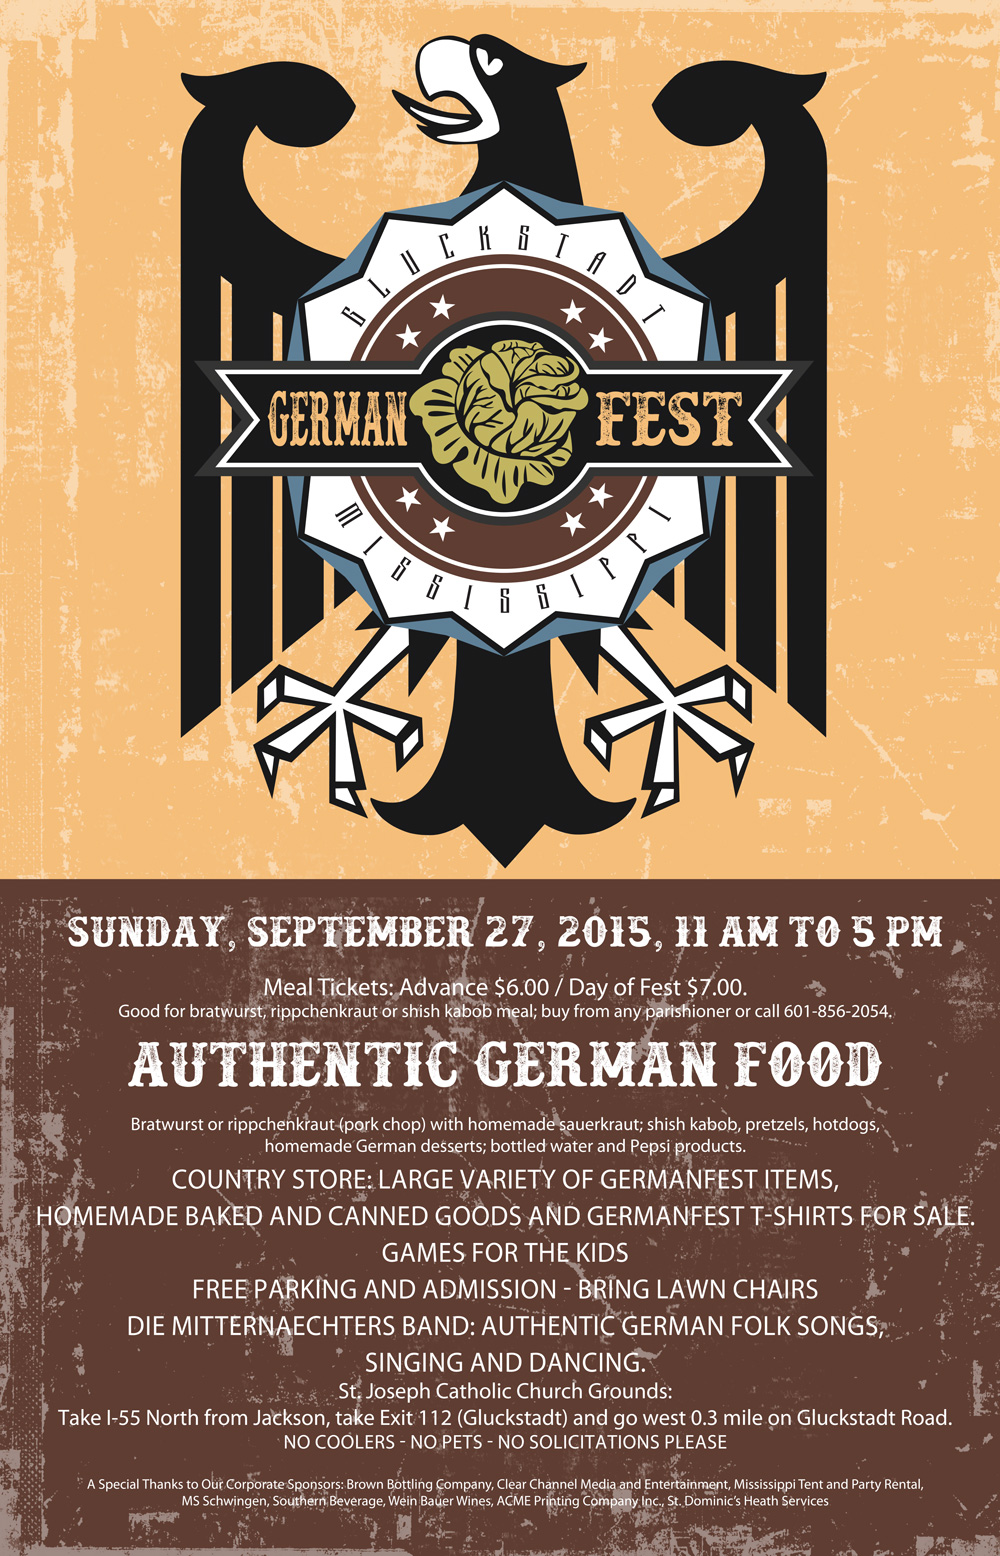 germanfest-poster-15-11x17-outlined